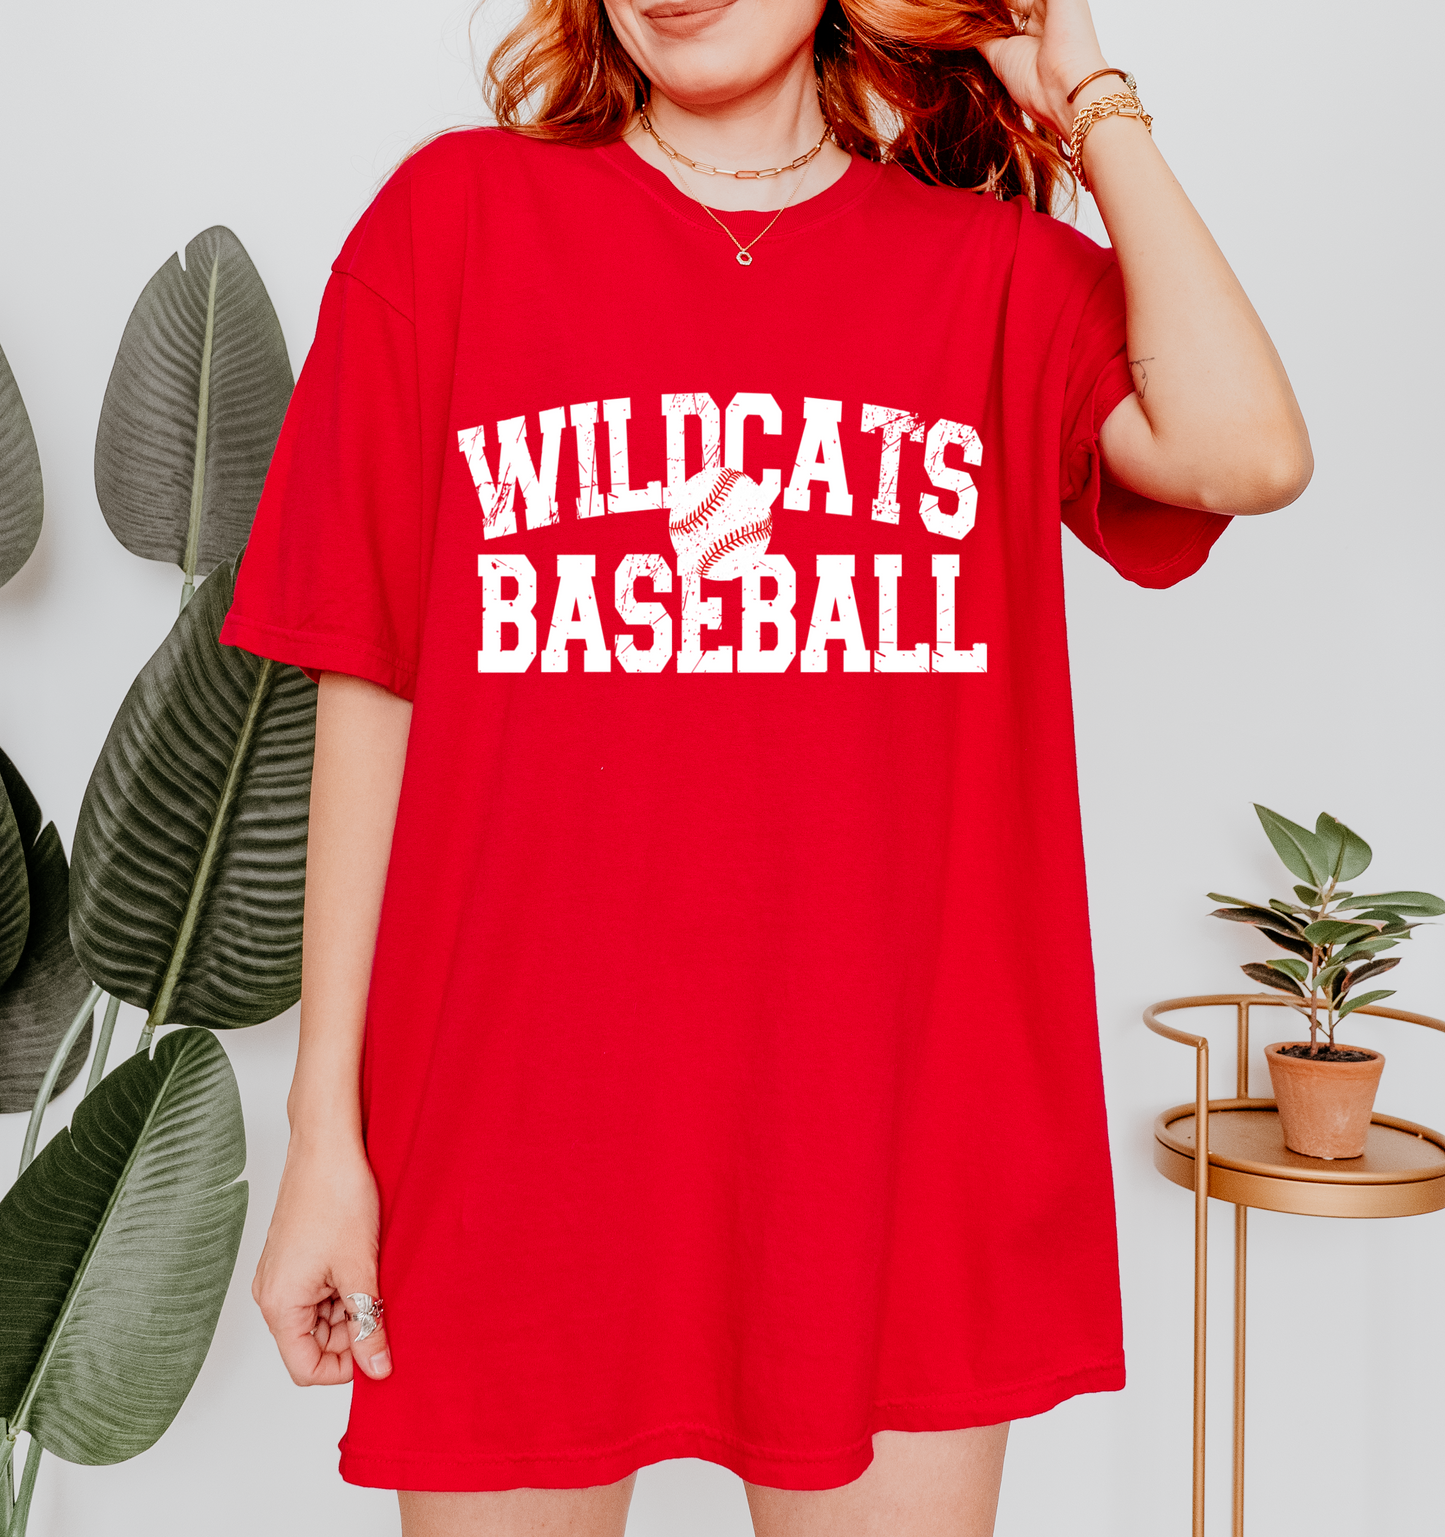 Wildcats Baseball Tee/ Comfort Colors or Bella Canvas Soft Style / Youth and Adult Sizes